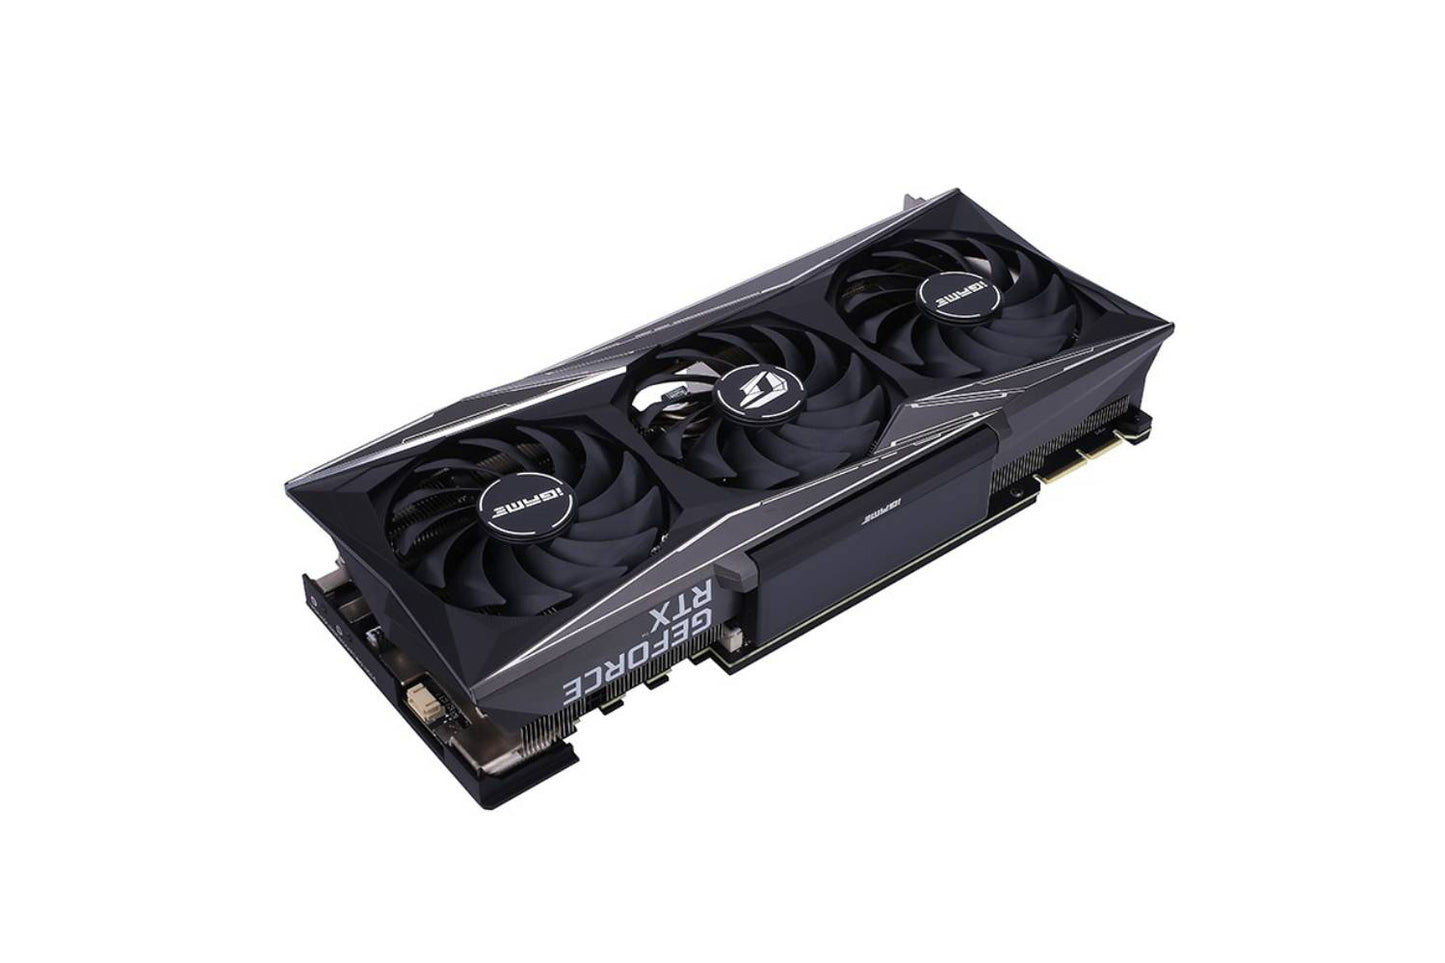 Colorful iGame GeForce RTX 3090 Vulcan OC-V Graphics Card